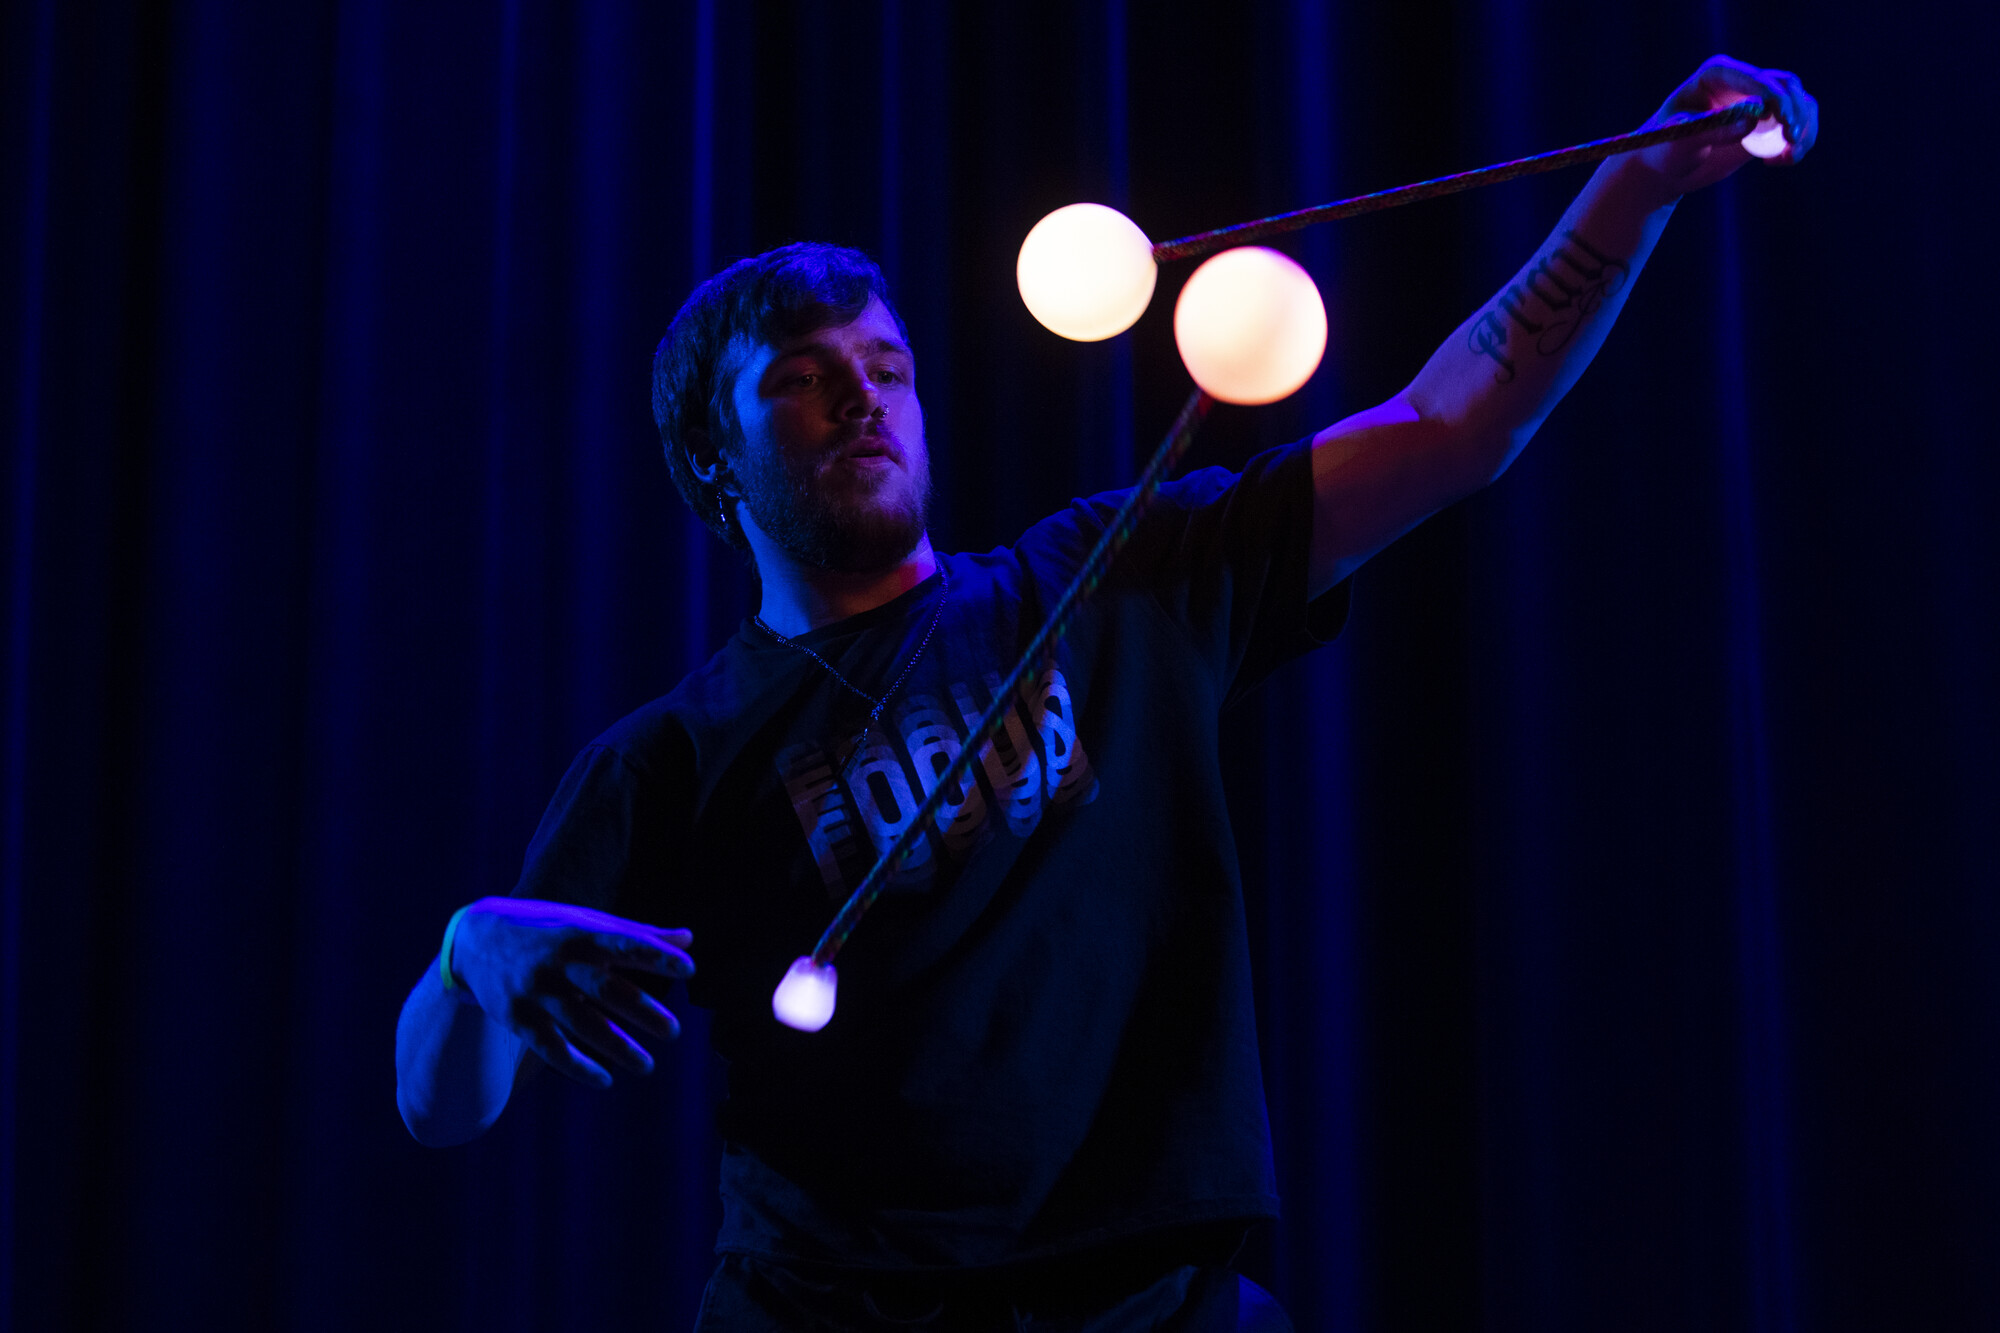 Caleab Hutto performs a flow arts routine during Collin's Got Talent 2021.